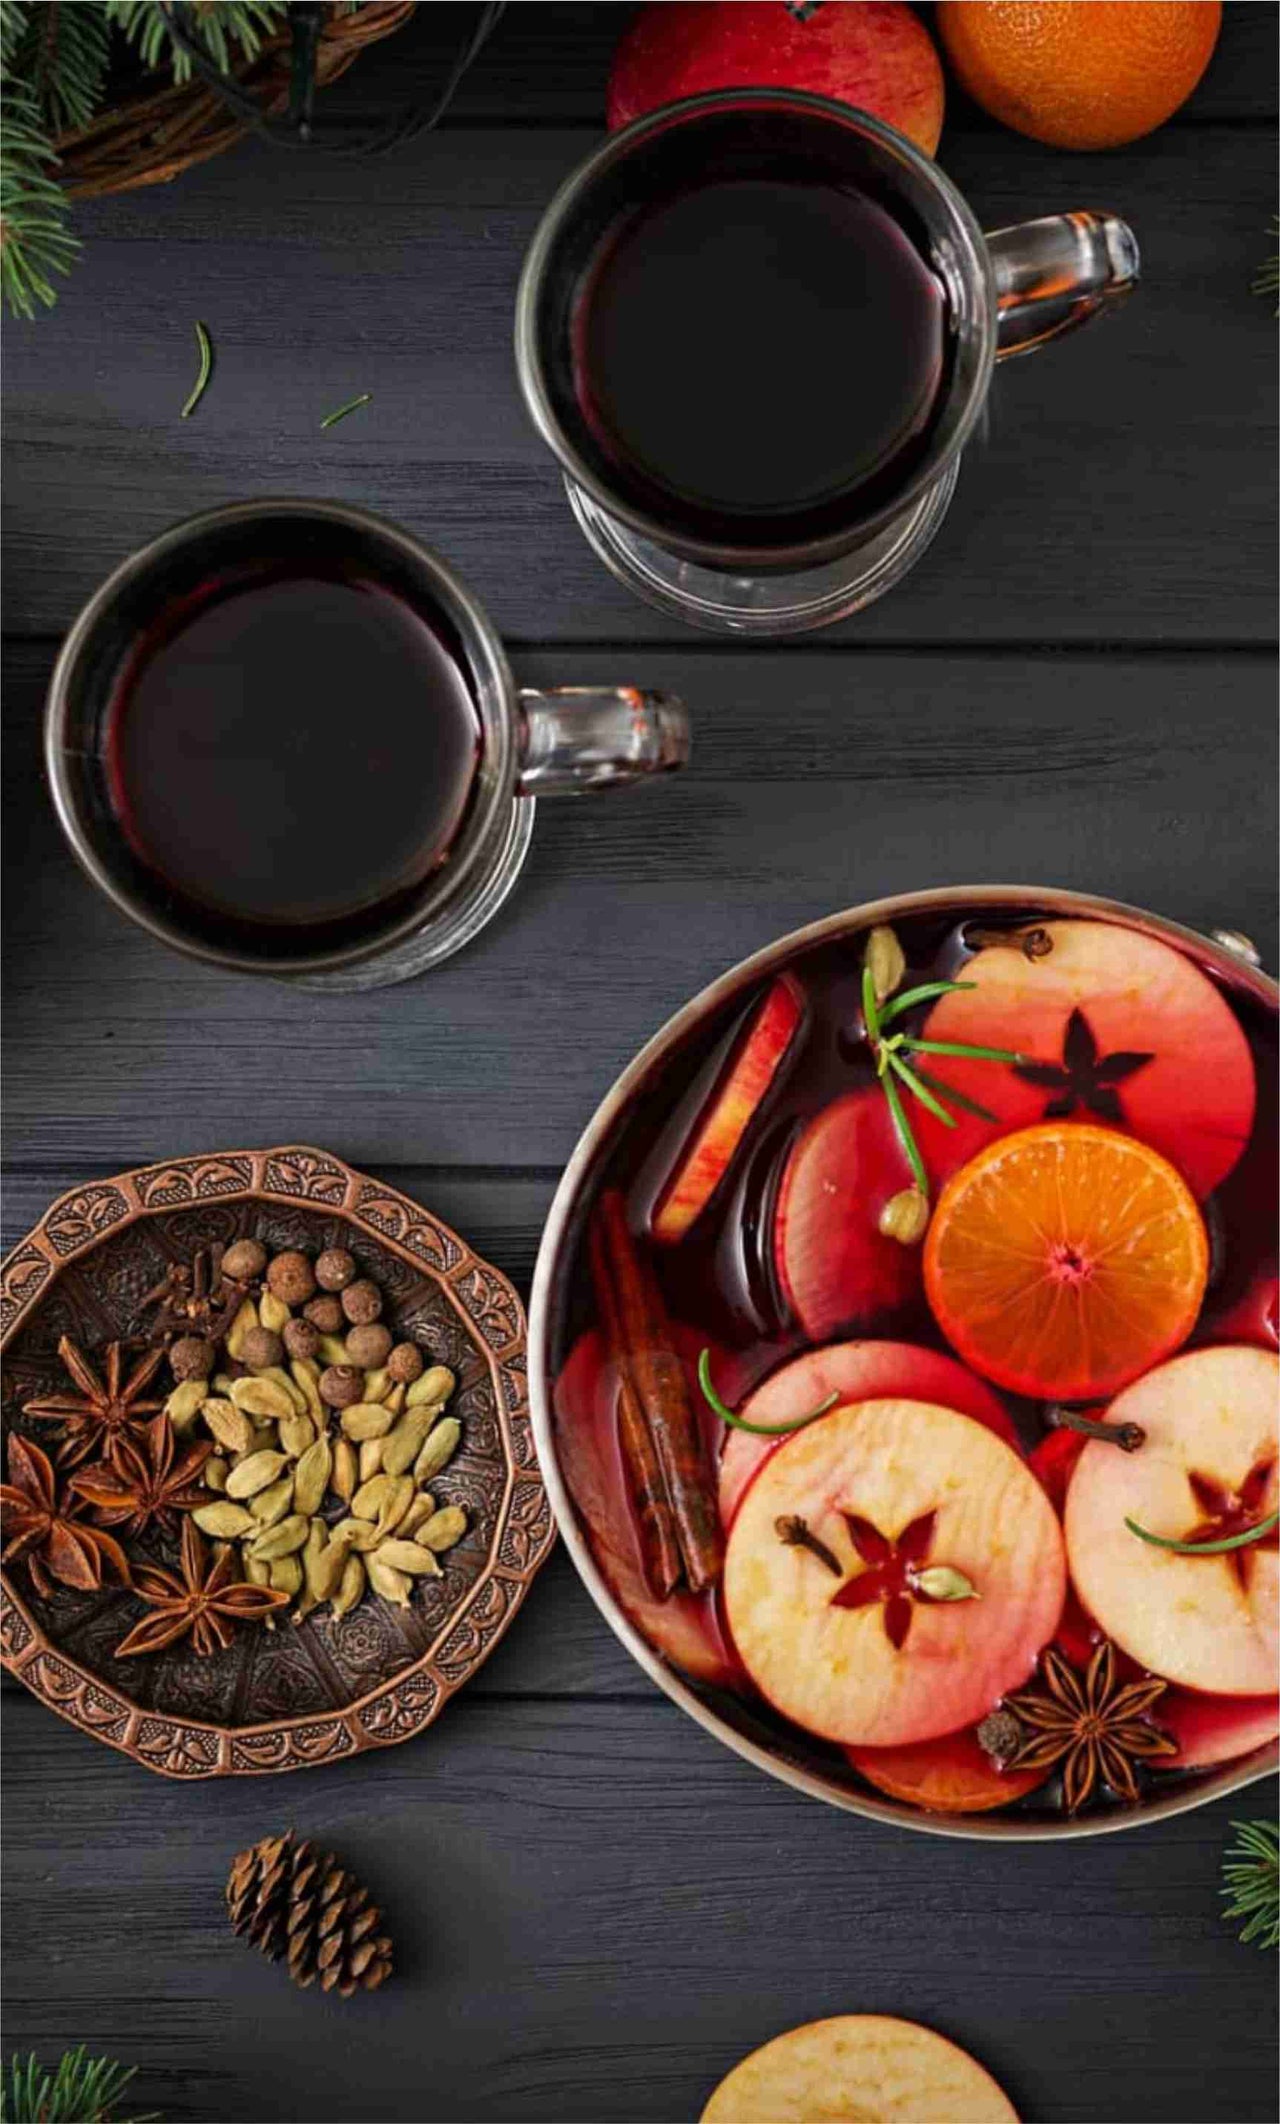 MULLED WINE